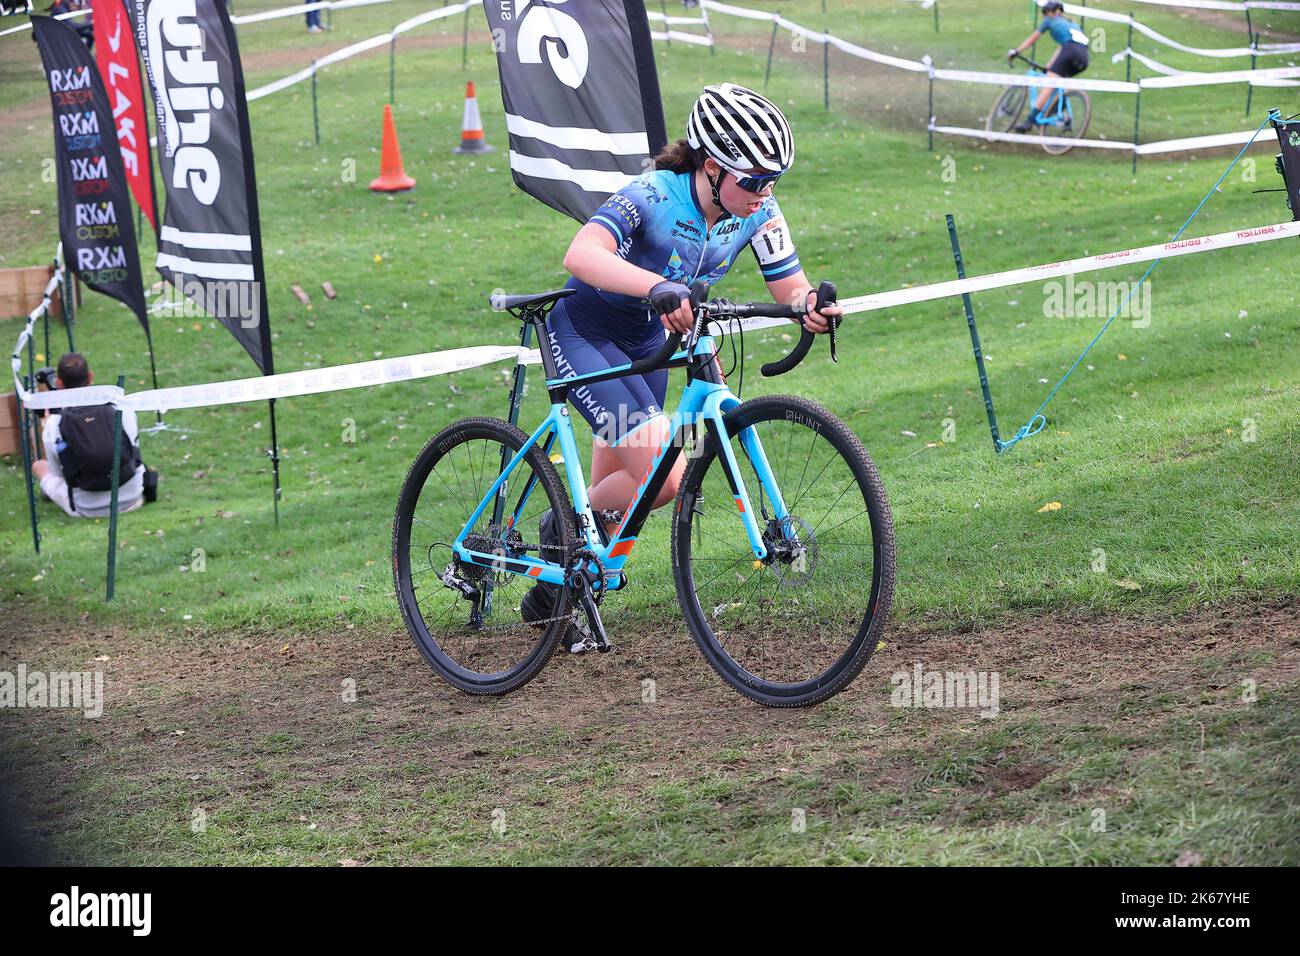 09.10.2022   Derby, England. Cyclocross.                   Lotta Mansfield (Montezuma's Race Team) on her way to finishing 9th in the British Cycling Womens Cyclocross Nation Championship round 2 (Derby) held at the Moorways Sports Village, Derby.  © Phil Hutchinson Stock Photo